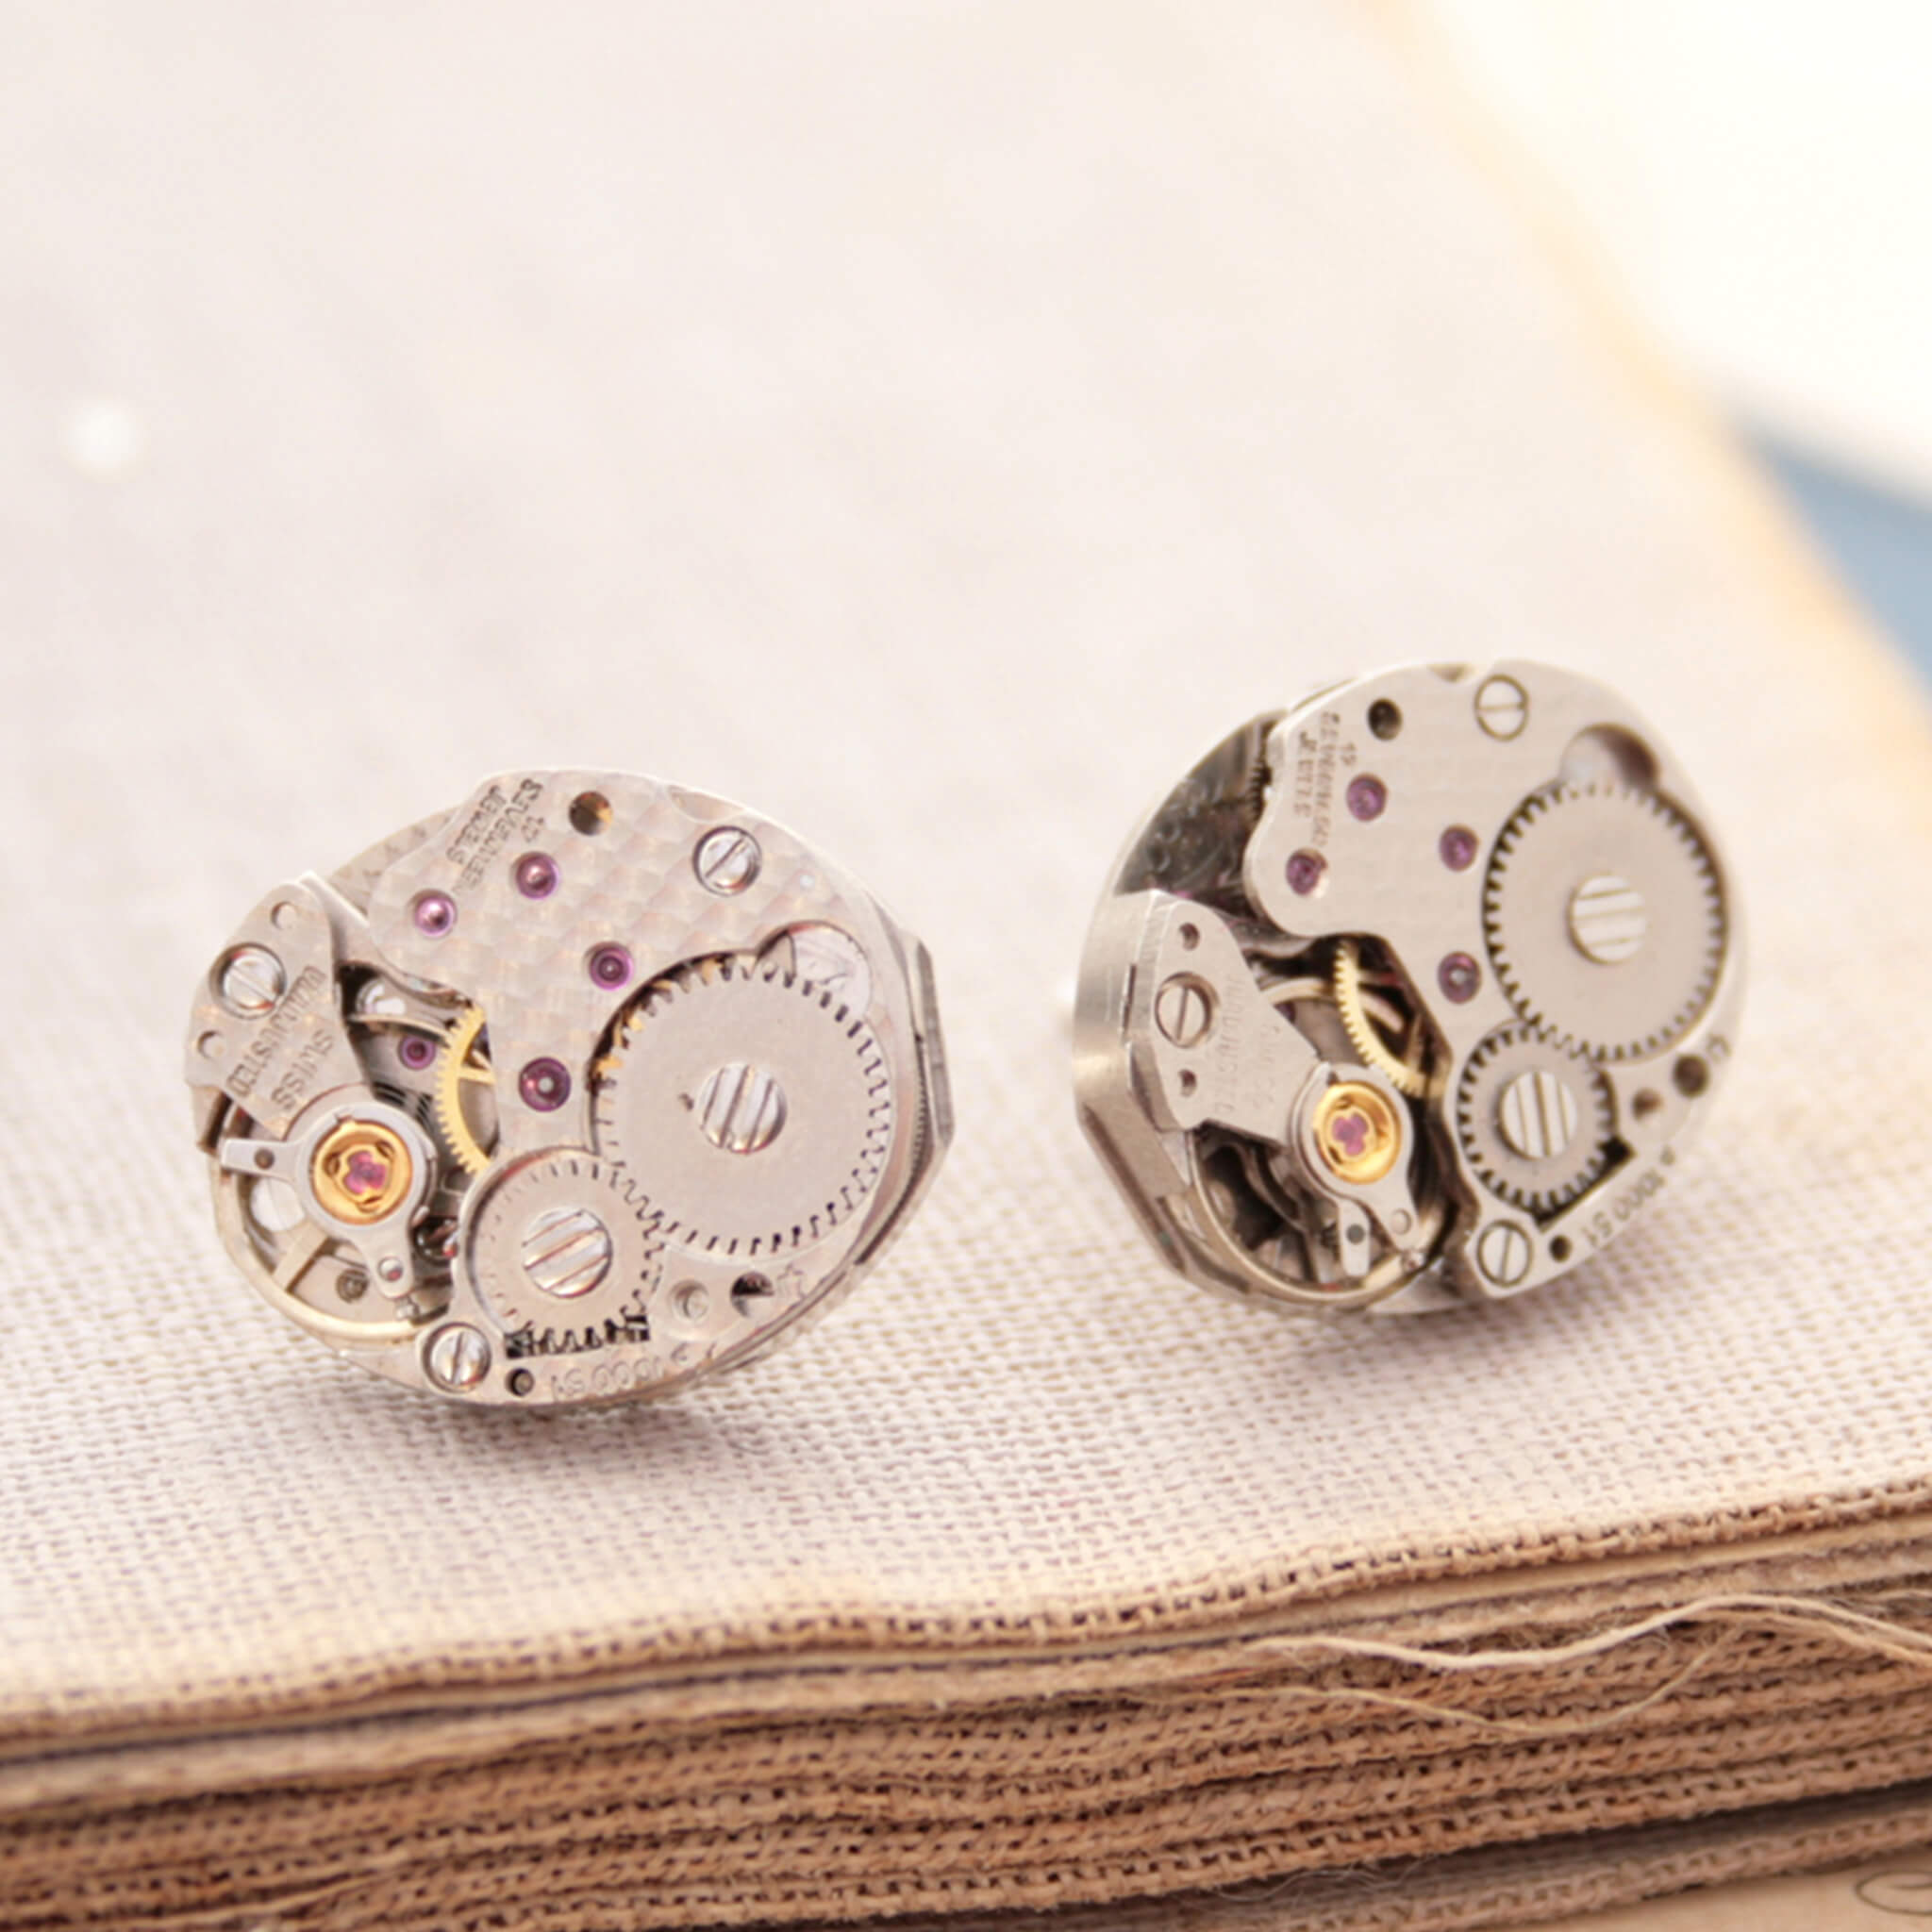 Watch movements turned into stud earrings lying on a vintage book